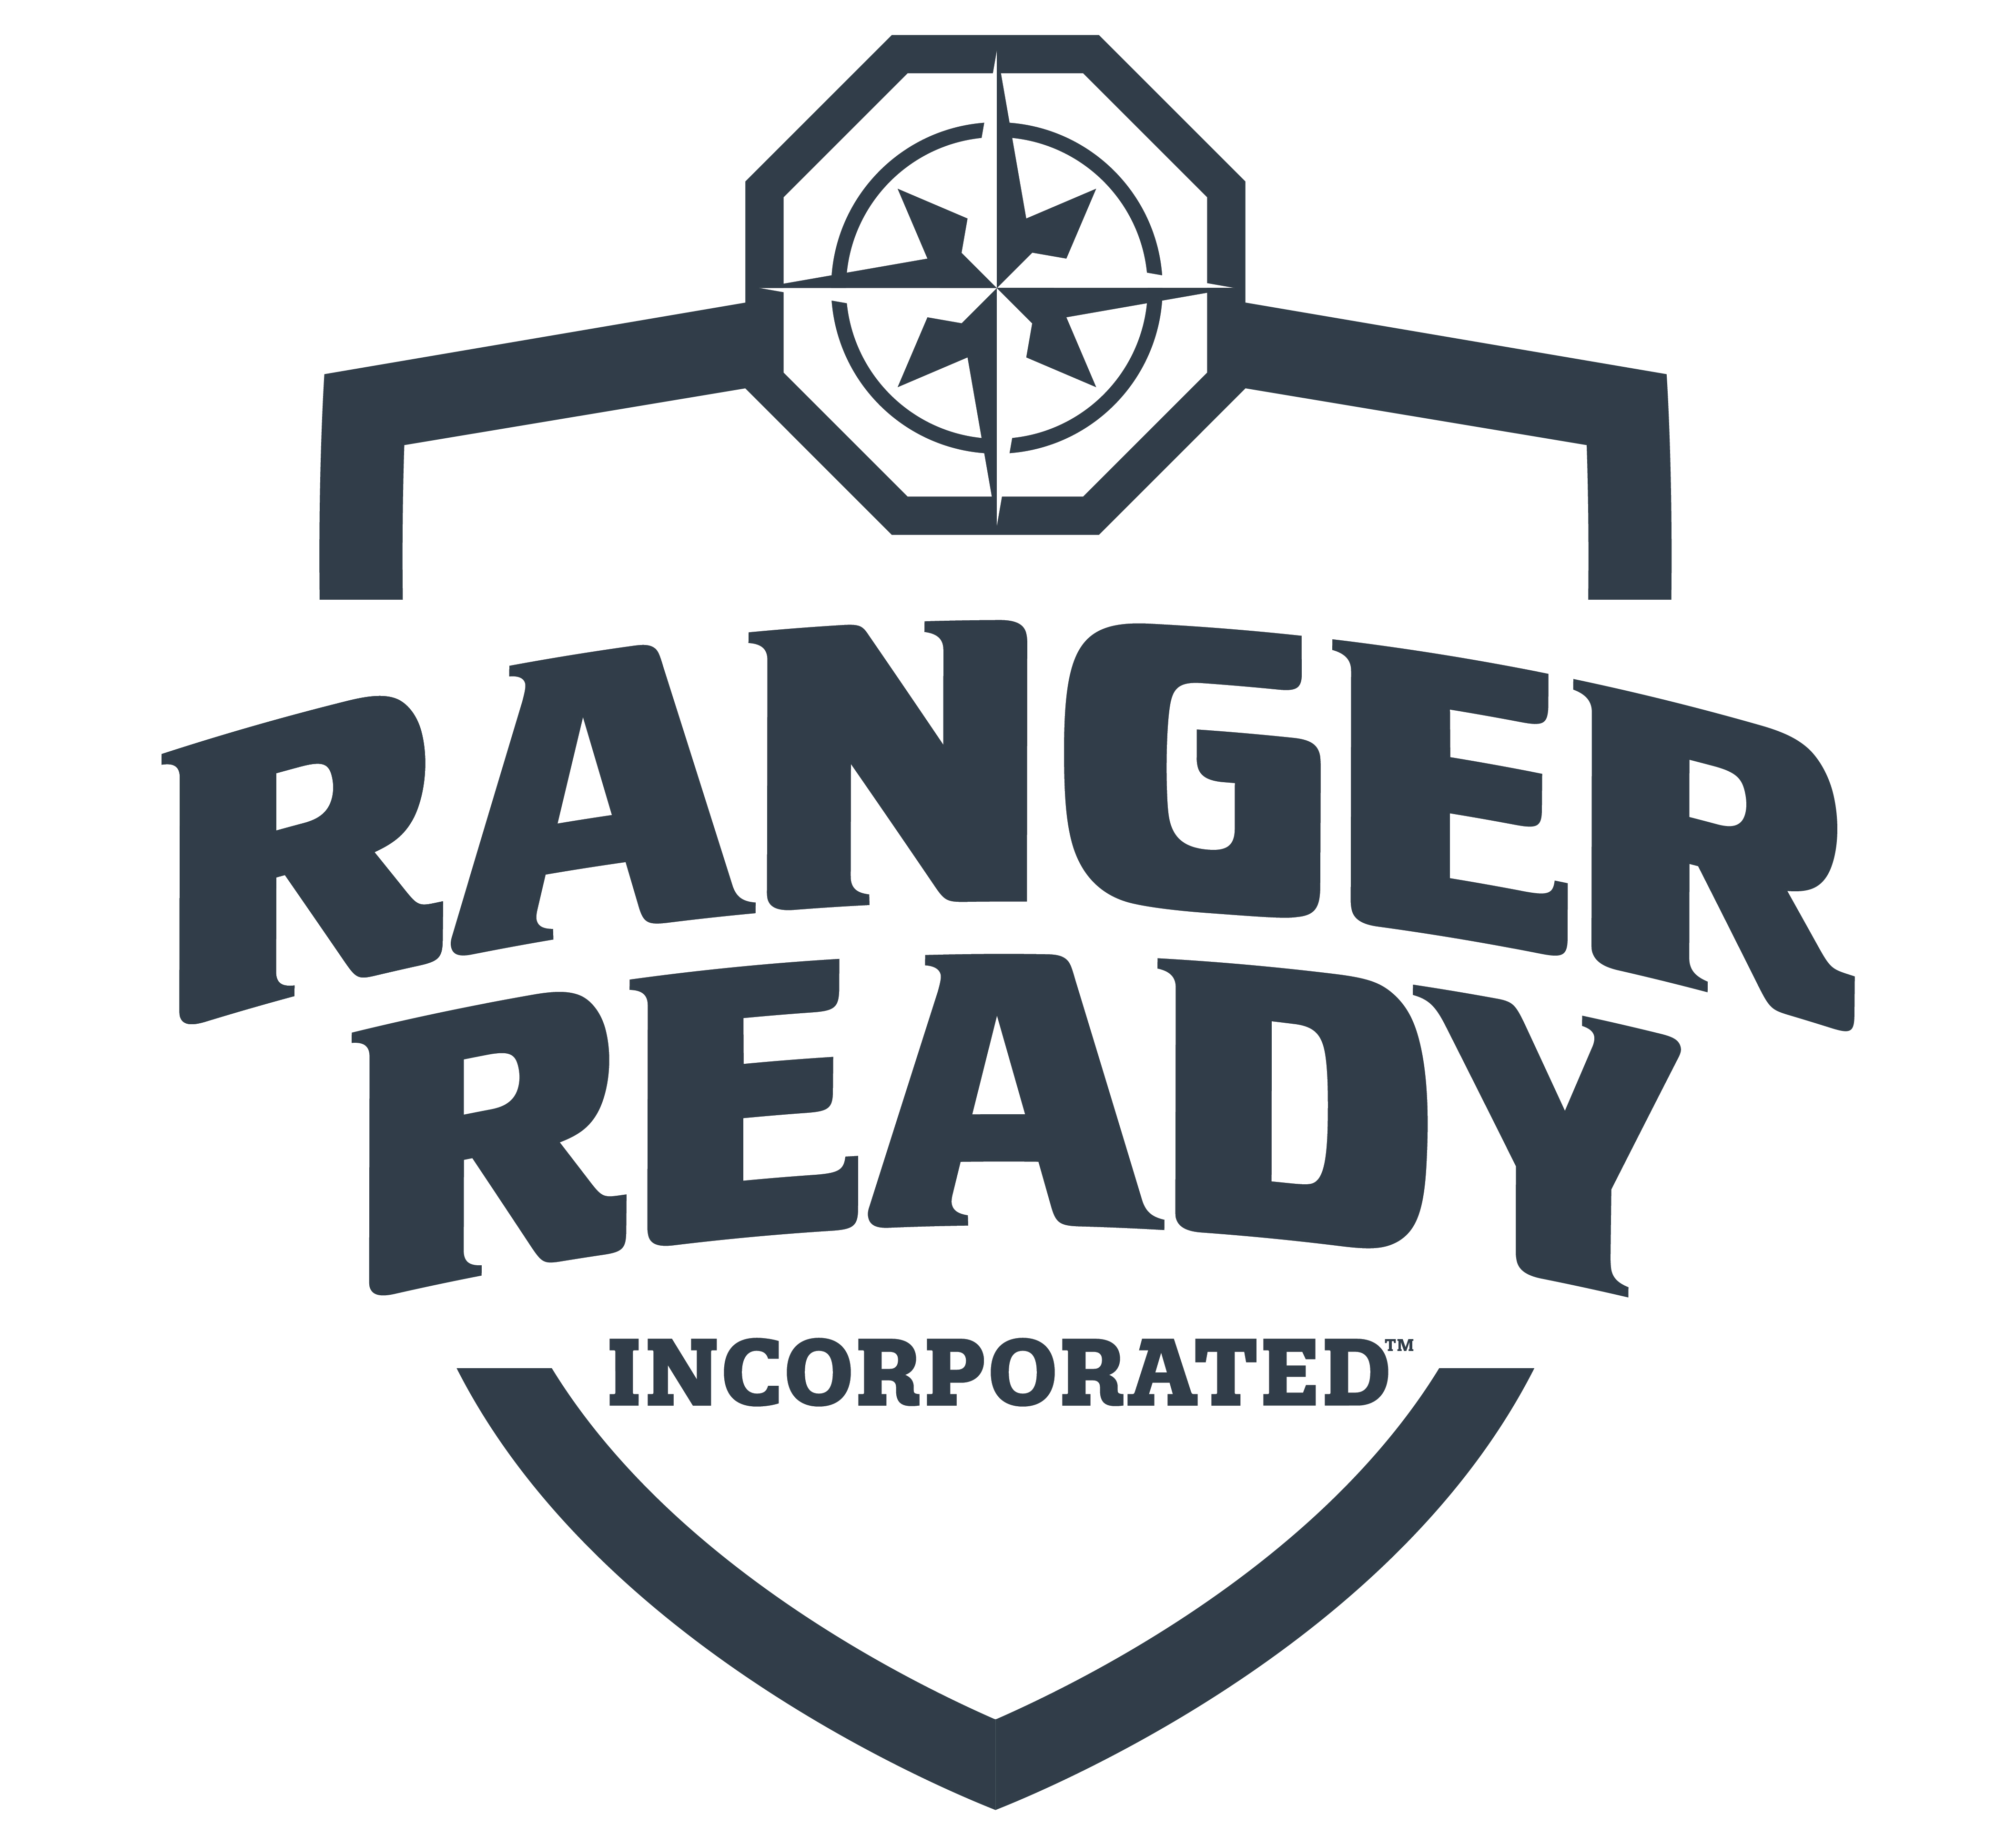 Category-innovator, Ranger Ready Repellents, establishes a new entity, Ranger Ready Inc., and expands Advisory Board to fuel growth. The move comes amidst successful new product launches that have added to the company’s premium offering and positioning as a lifestyle brand.